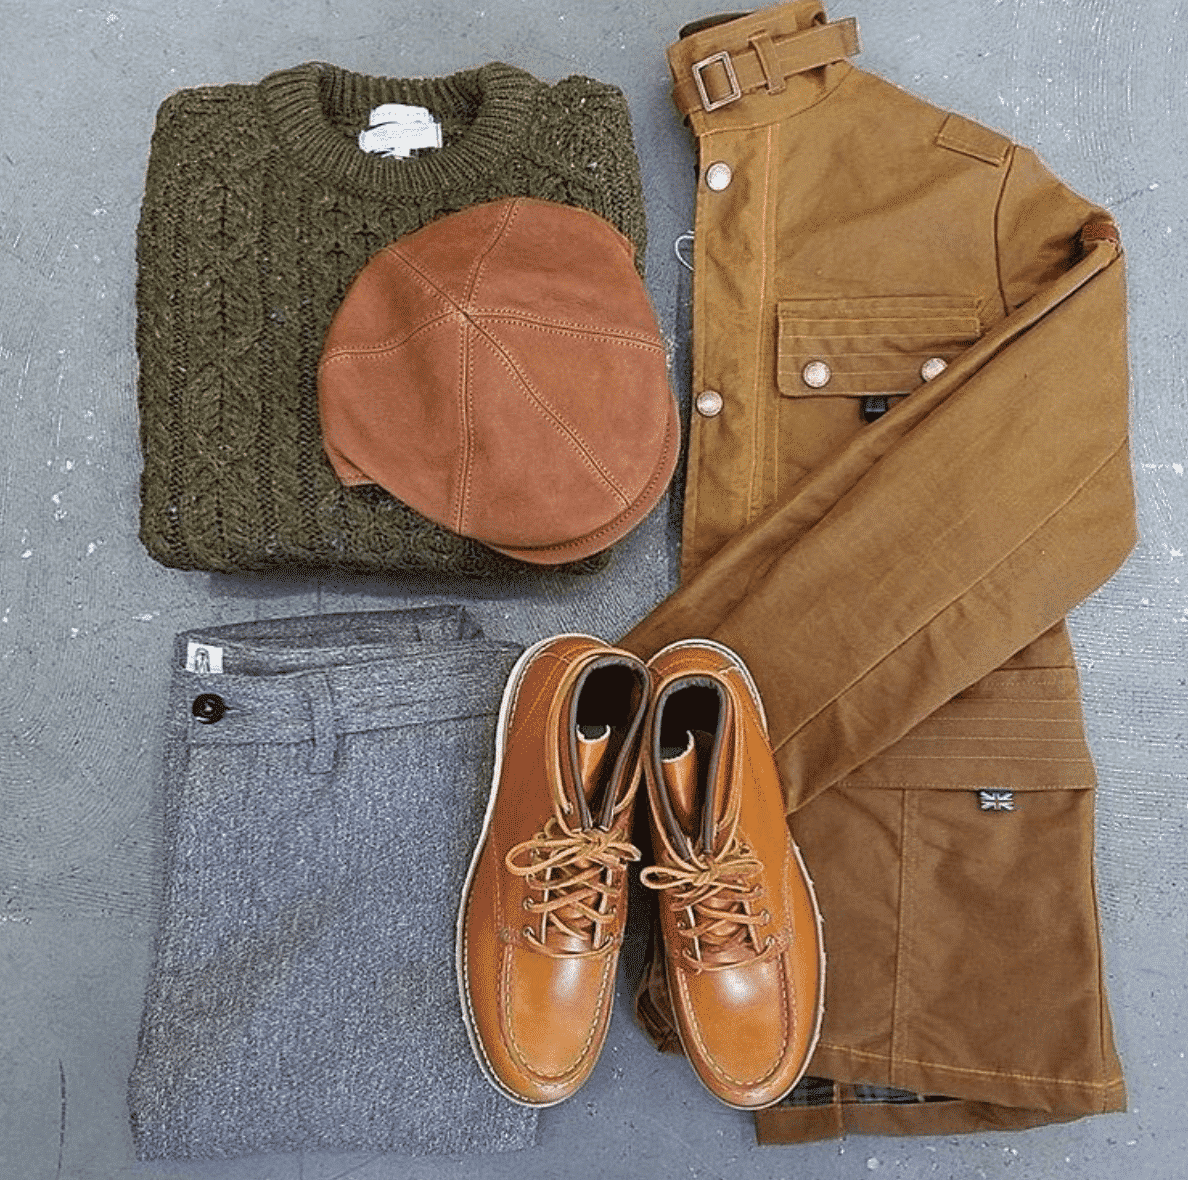 Brown Boots Outfit for Men-30 Ways to wear Brown Boots